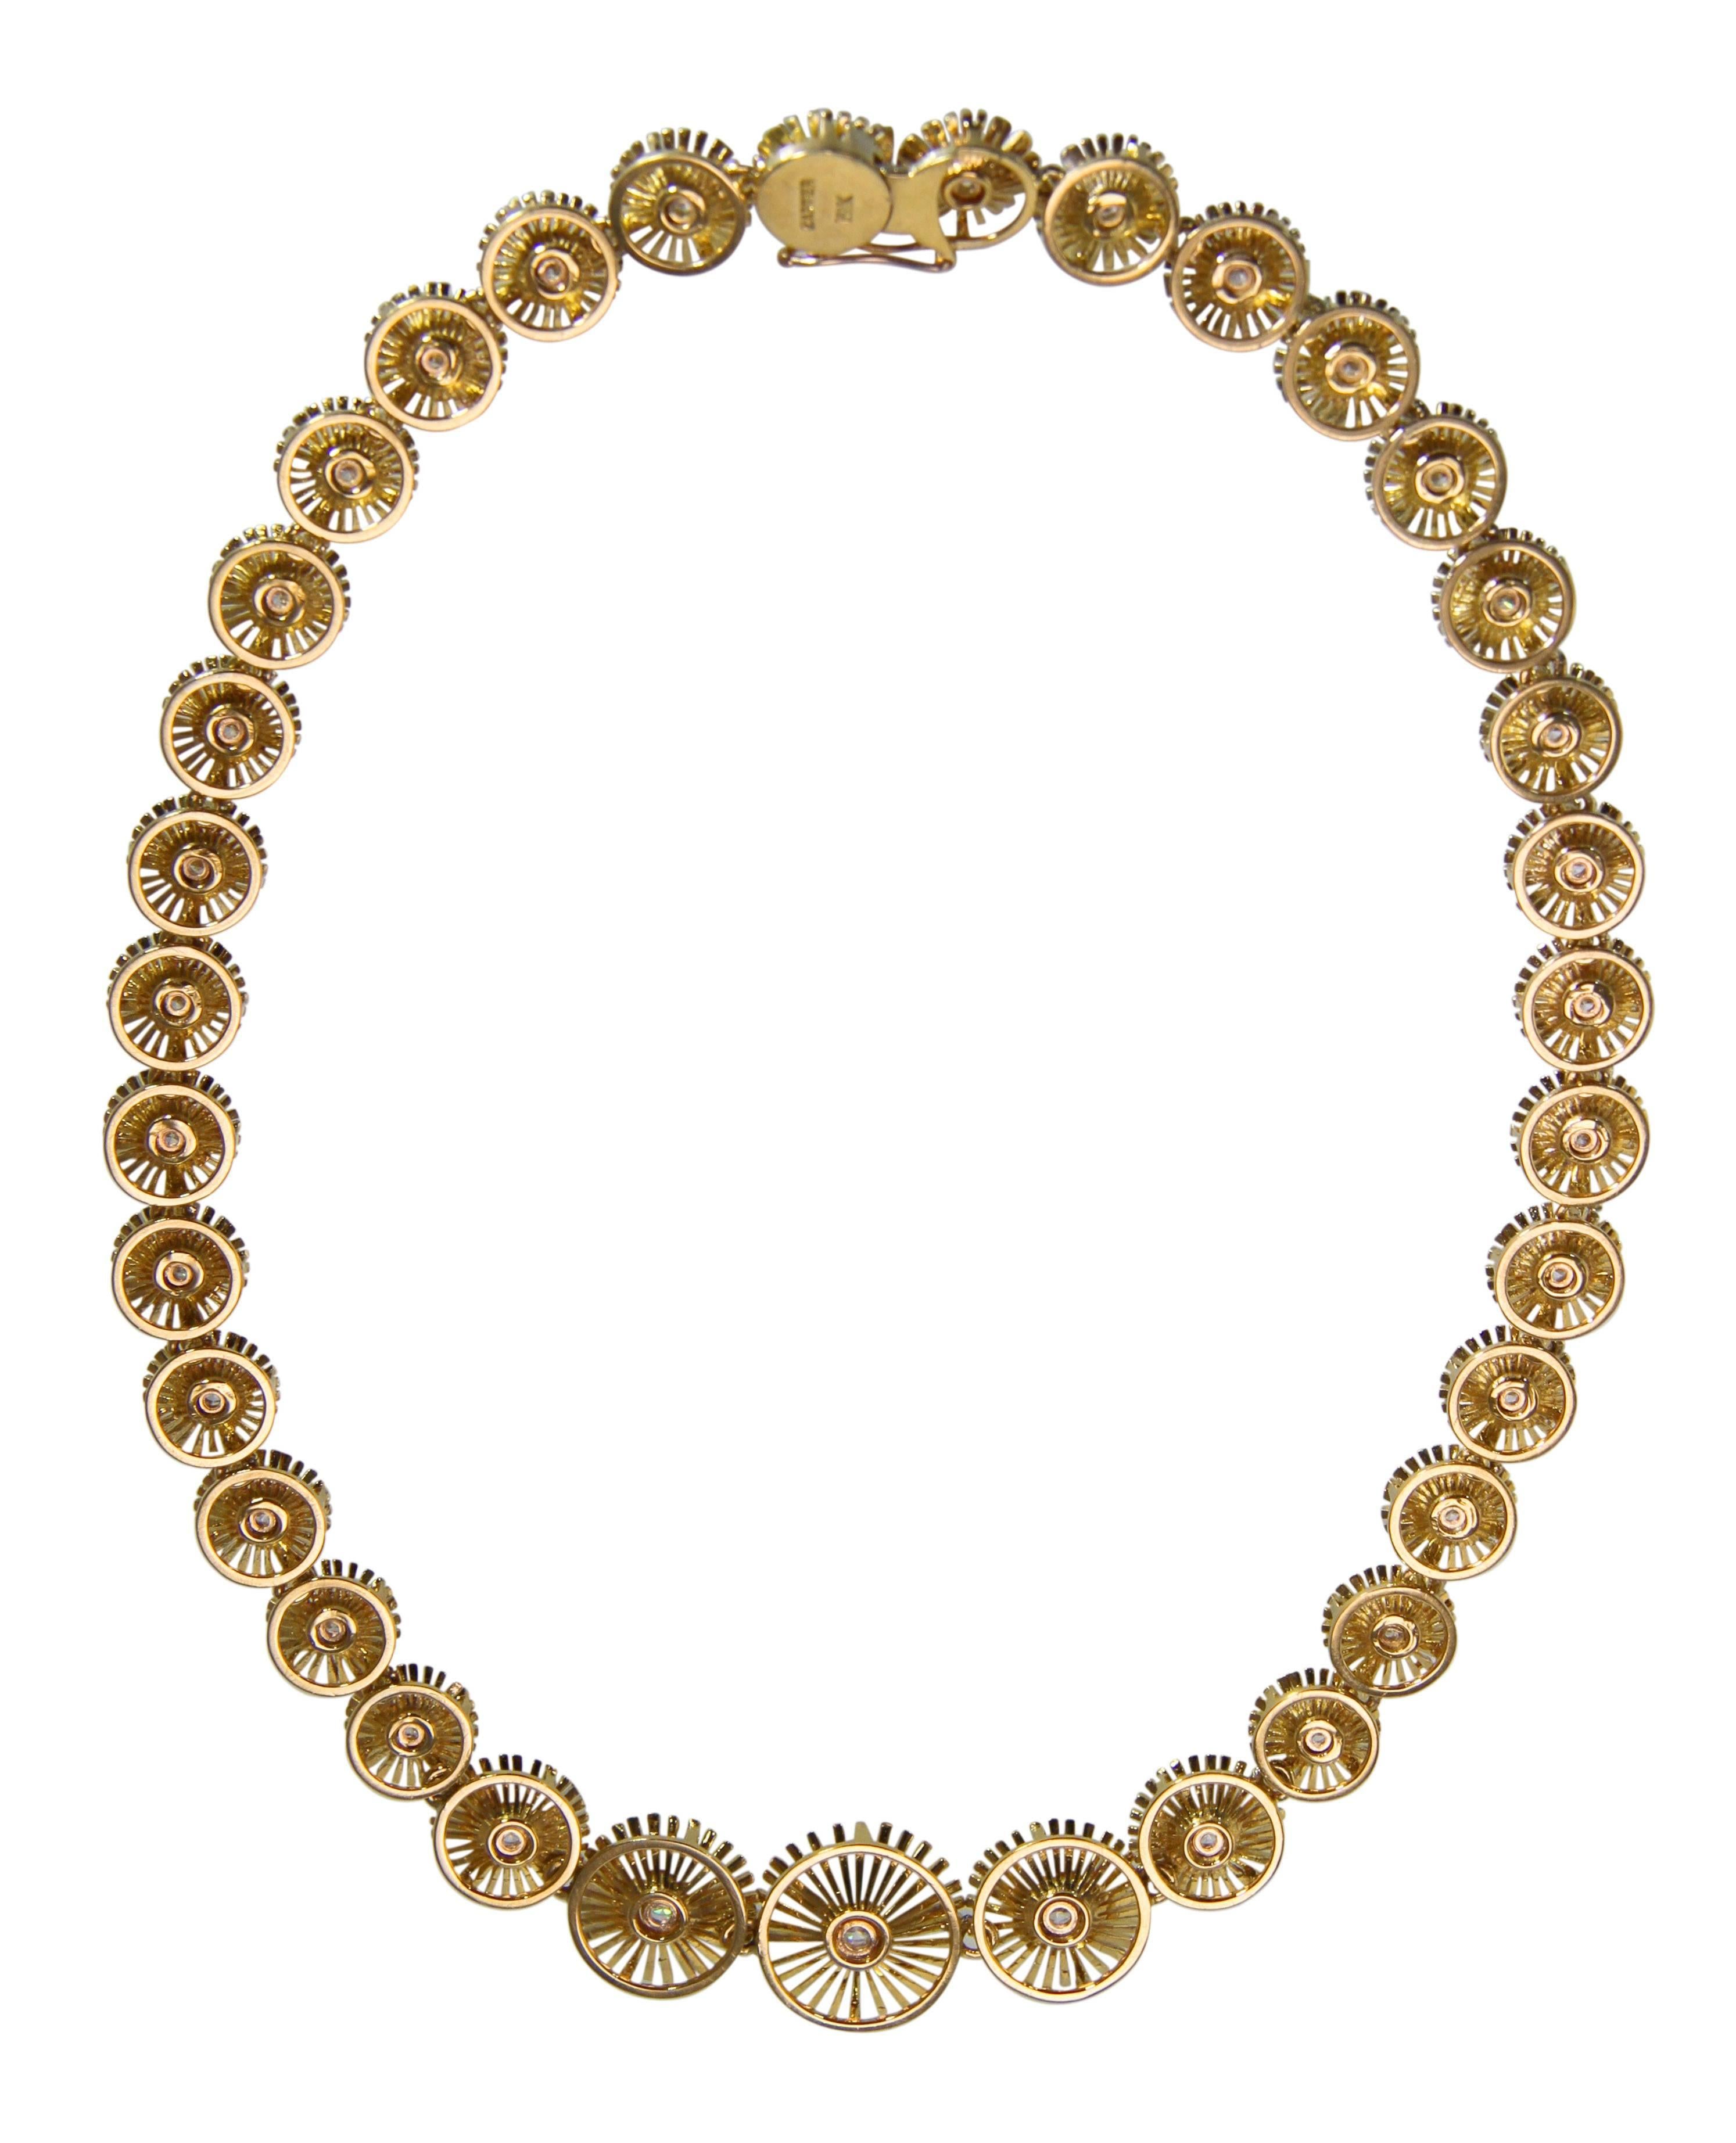 An 18 karat gold and diamond necklace by Cartier, circa 1960,
a graduated strand of circular links designed as openwork flowers set with 35 round diamonds weighing approximately 2.00 carats, length 15 1/4 inches, width tapers from 5/8 to 3/8 inch,